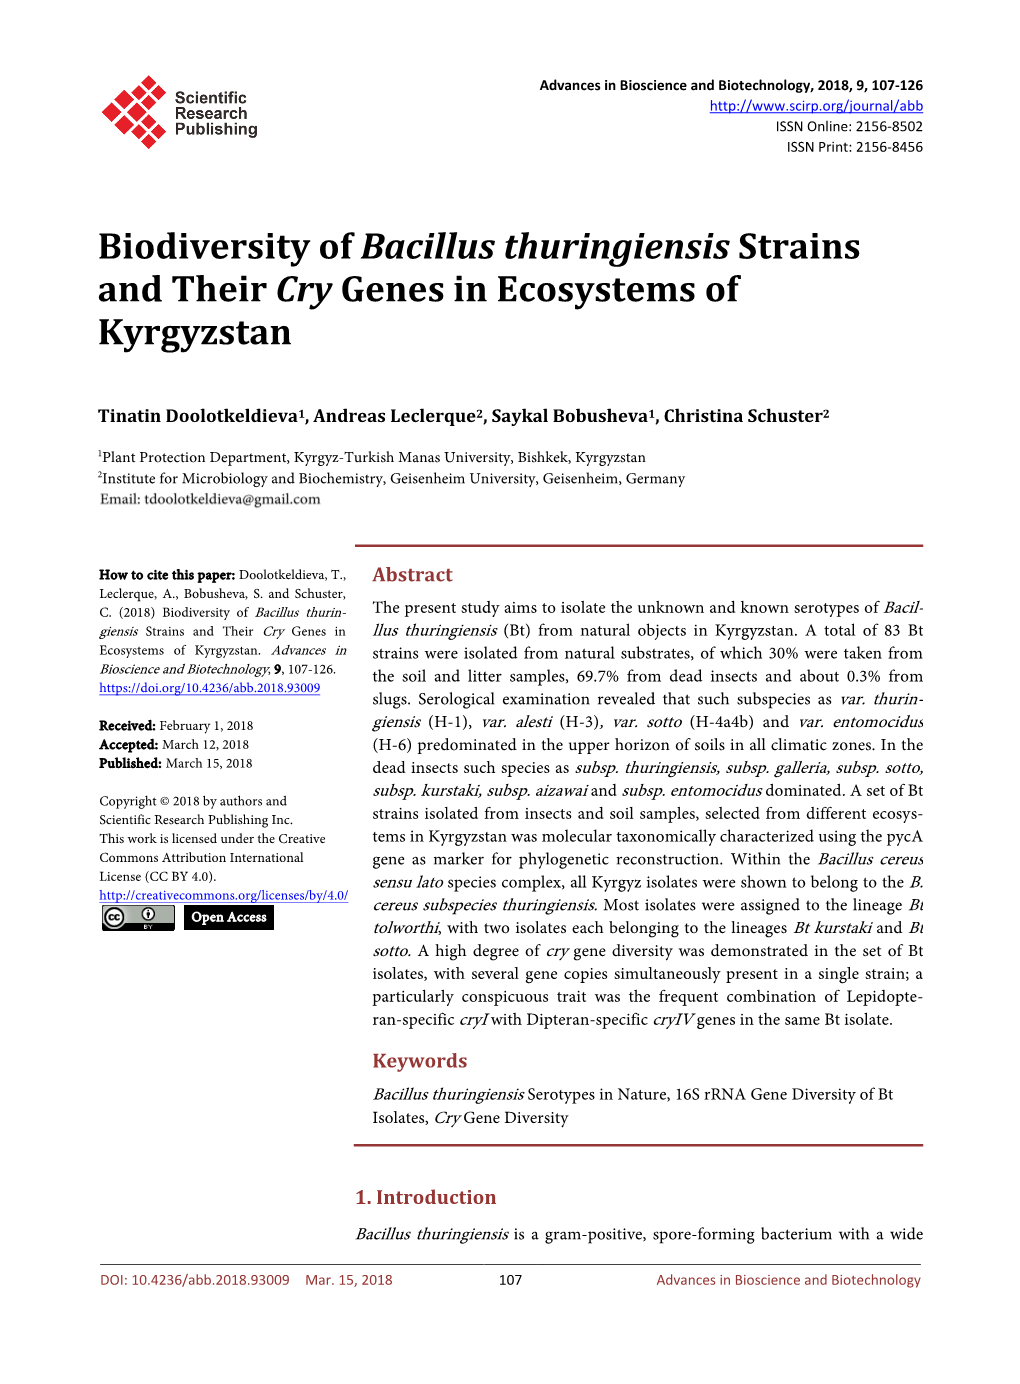 Biodiversity of Bacillus Thuringiensis Strains and Their Cry Genes in Ecosystems of Kyrgyzstan